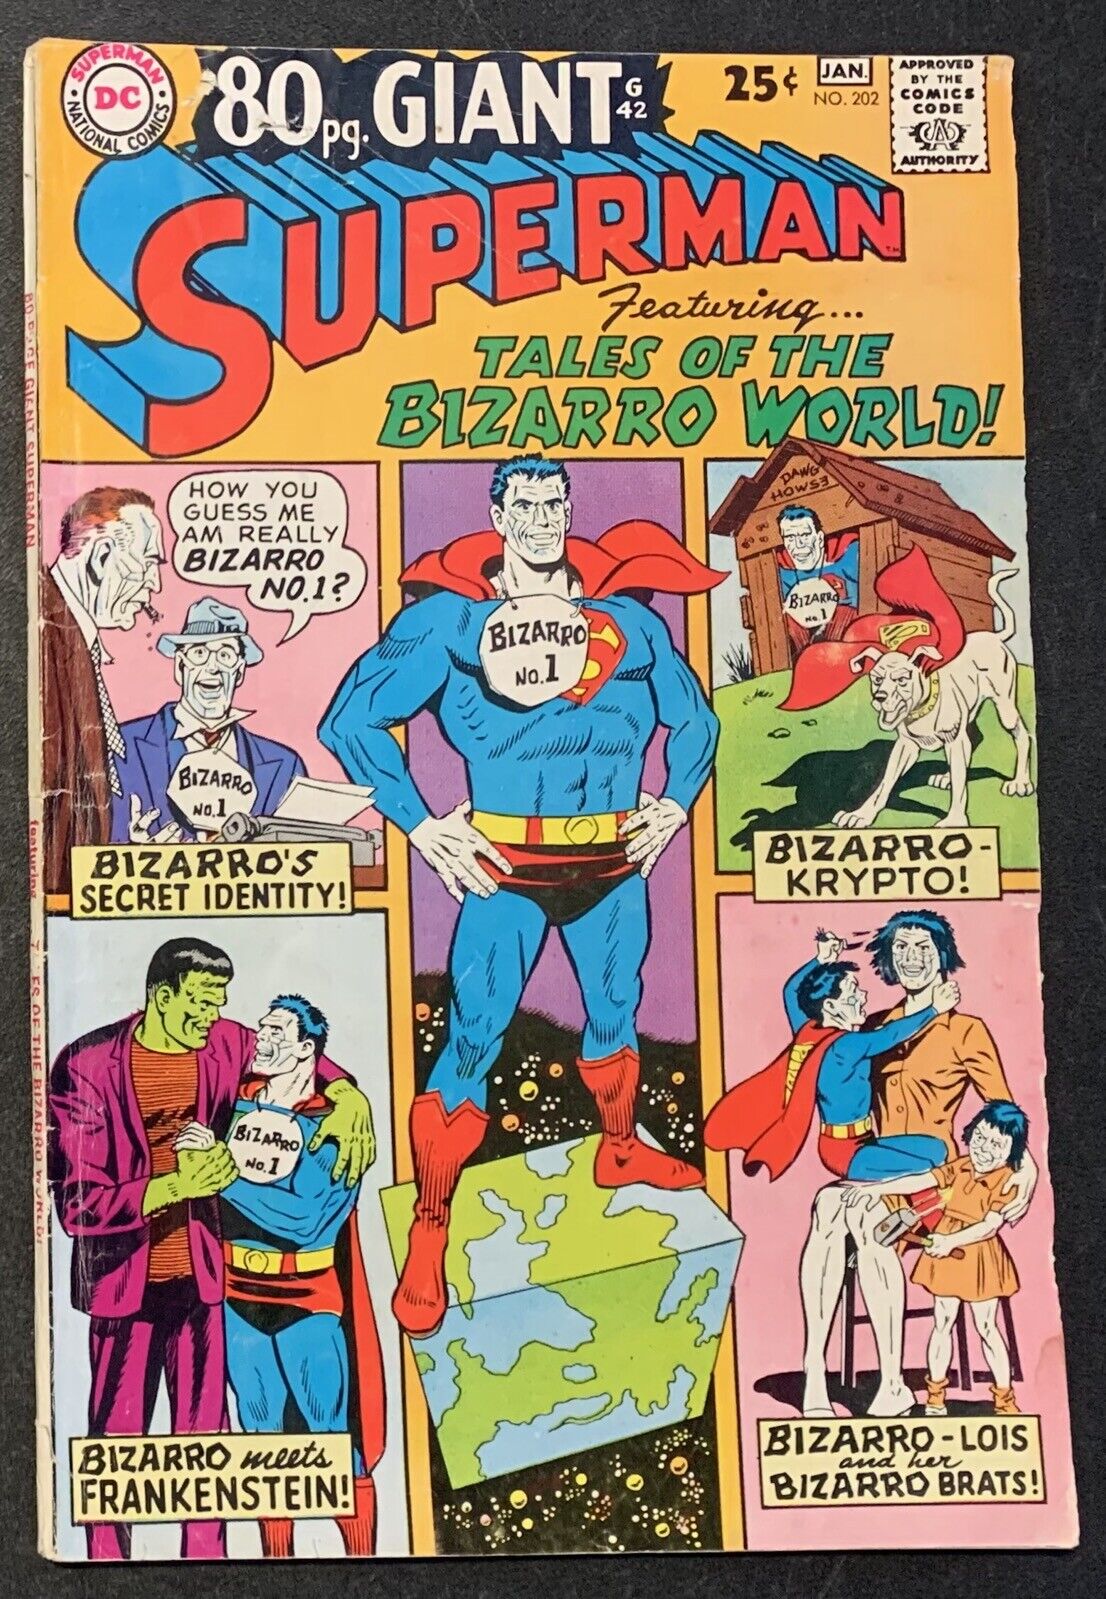 Superman #202  Jan 1967  All Bizarro Issue   80 Page Giant